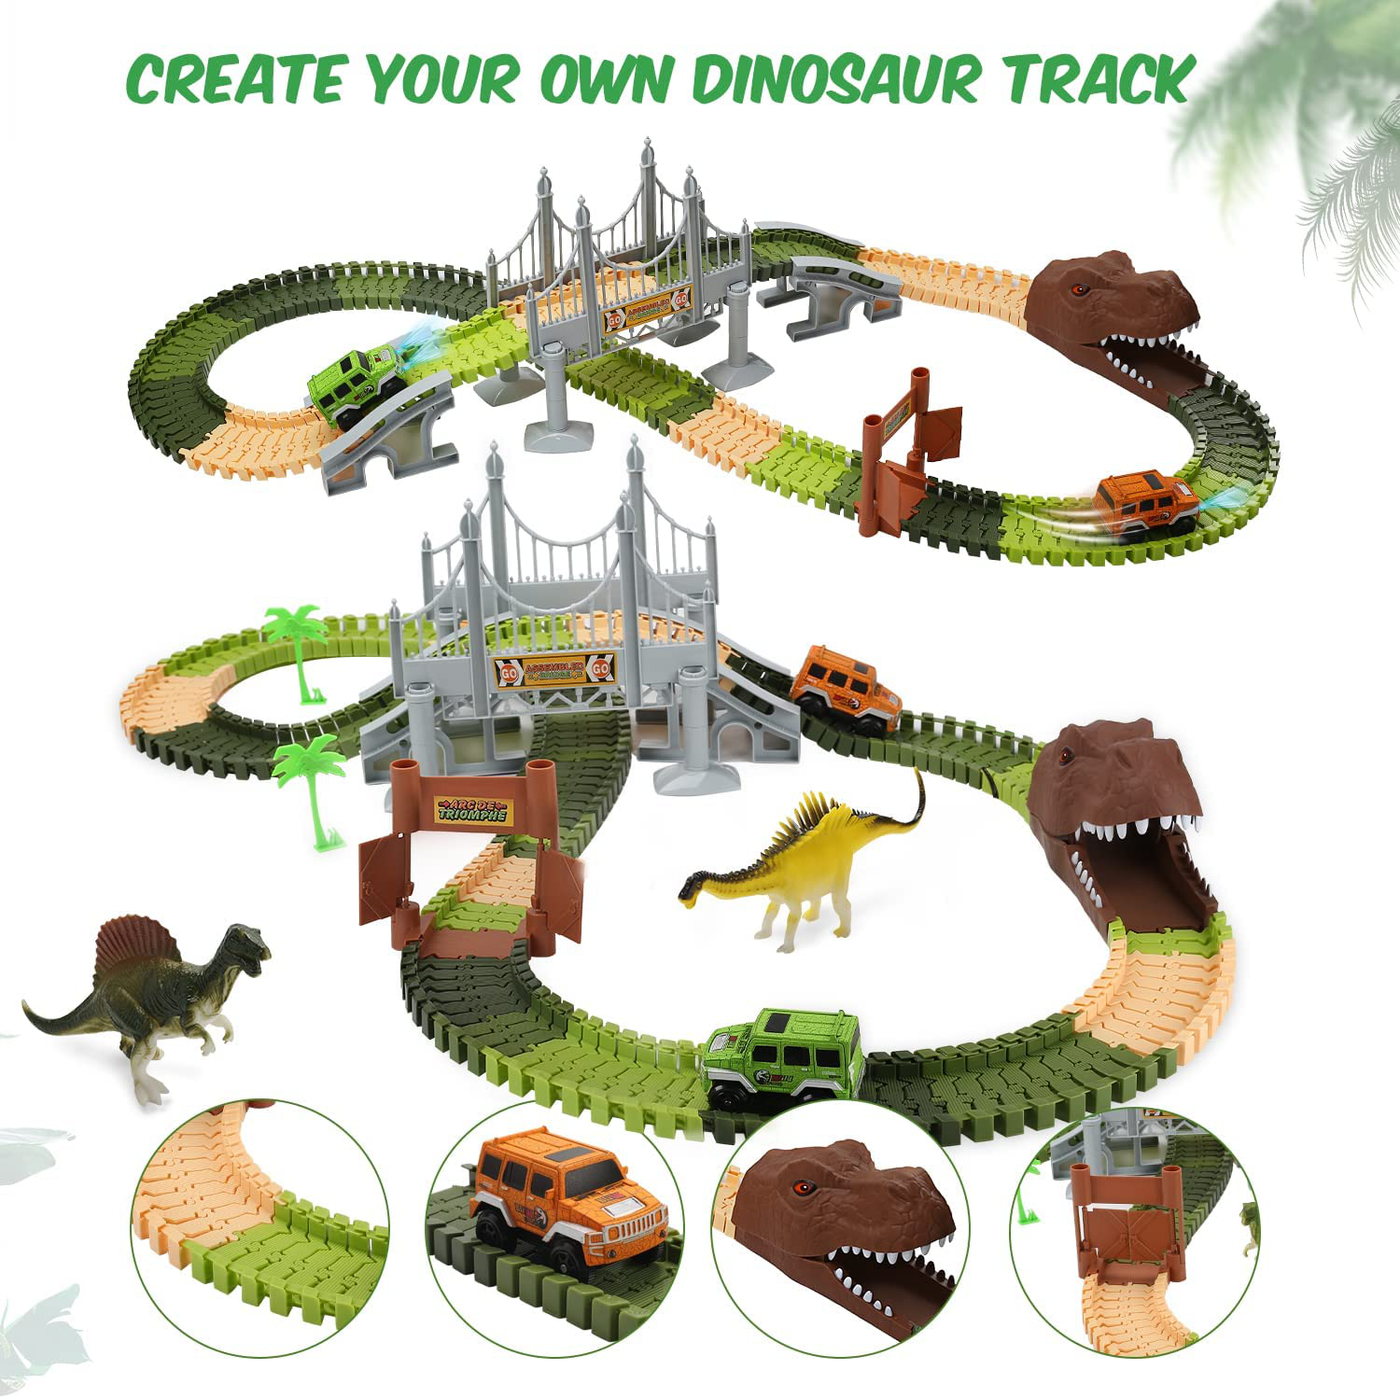 EagleStone Dinosaur Toys 194 Pcs Race Car Track Set for Kids,Flexible Train Tracks to Create A Dino World Road with Bridge,Ramp,2 Electric Cars with LED Light,Best Gift for Toddlers Boys and Girls